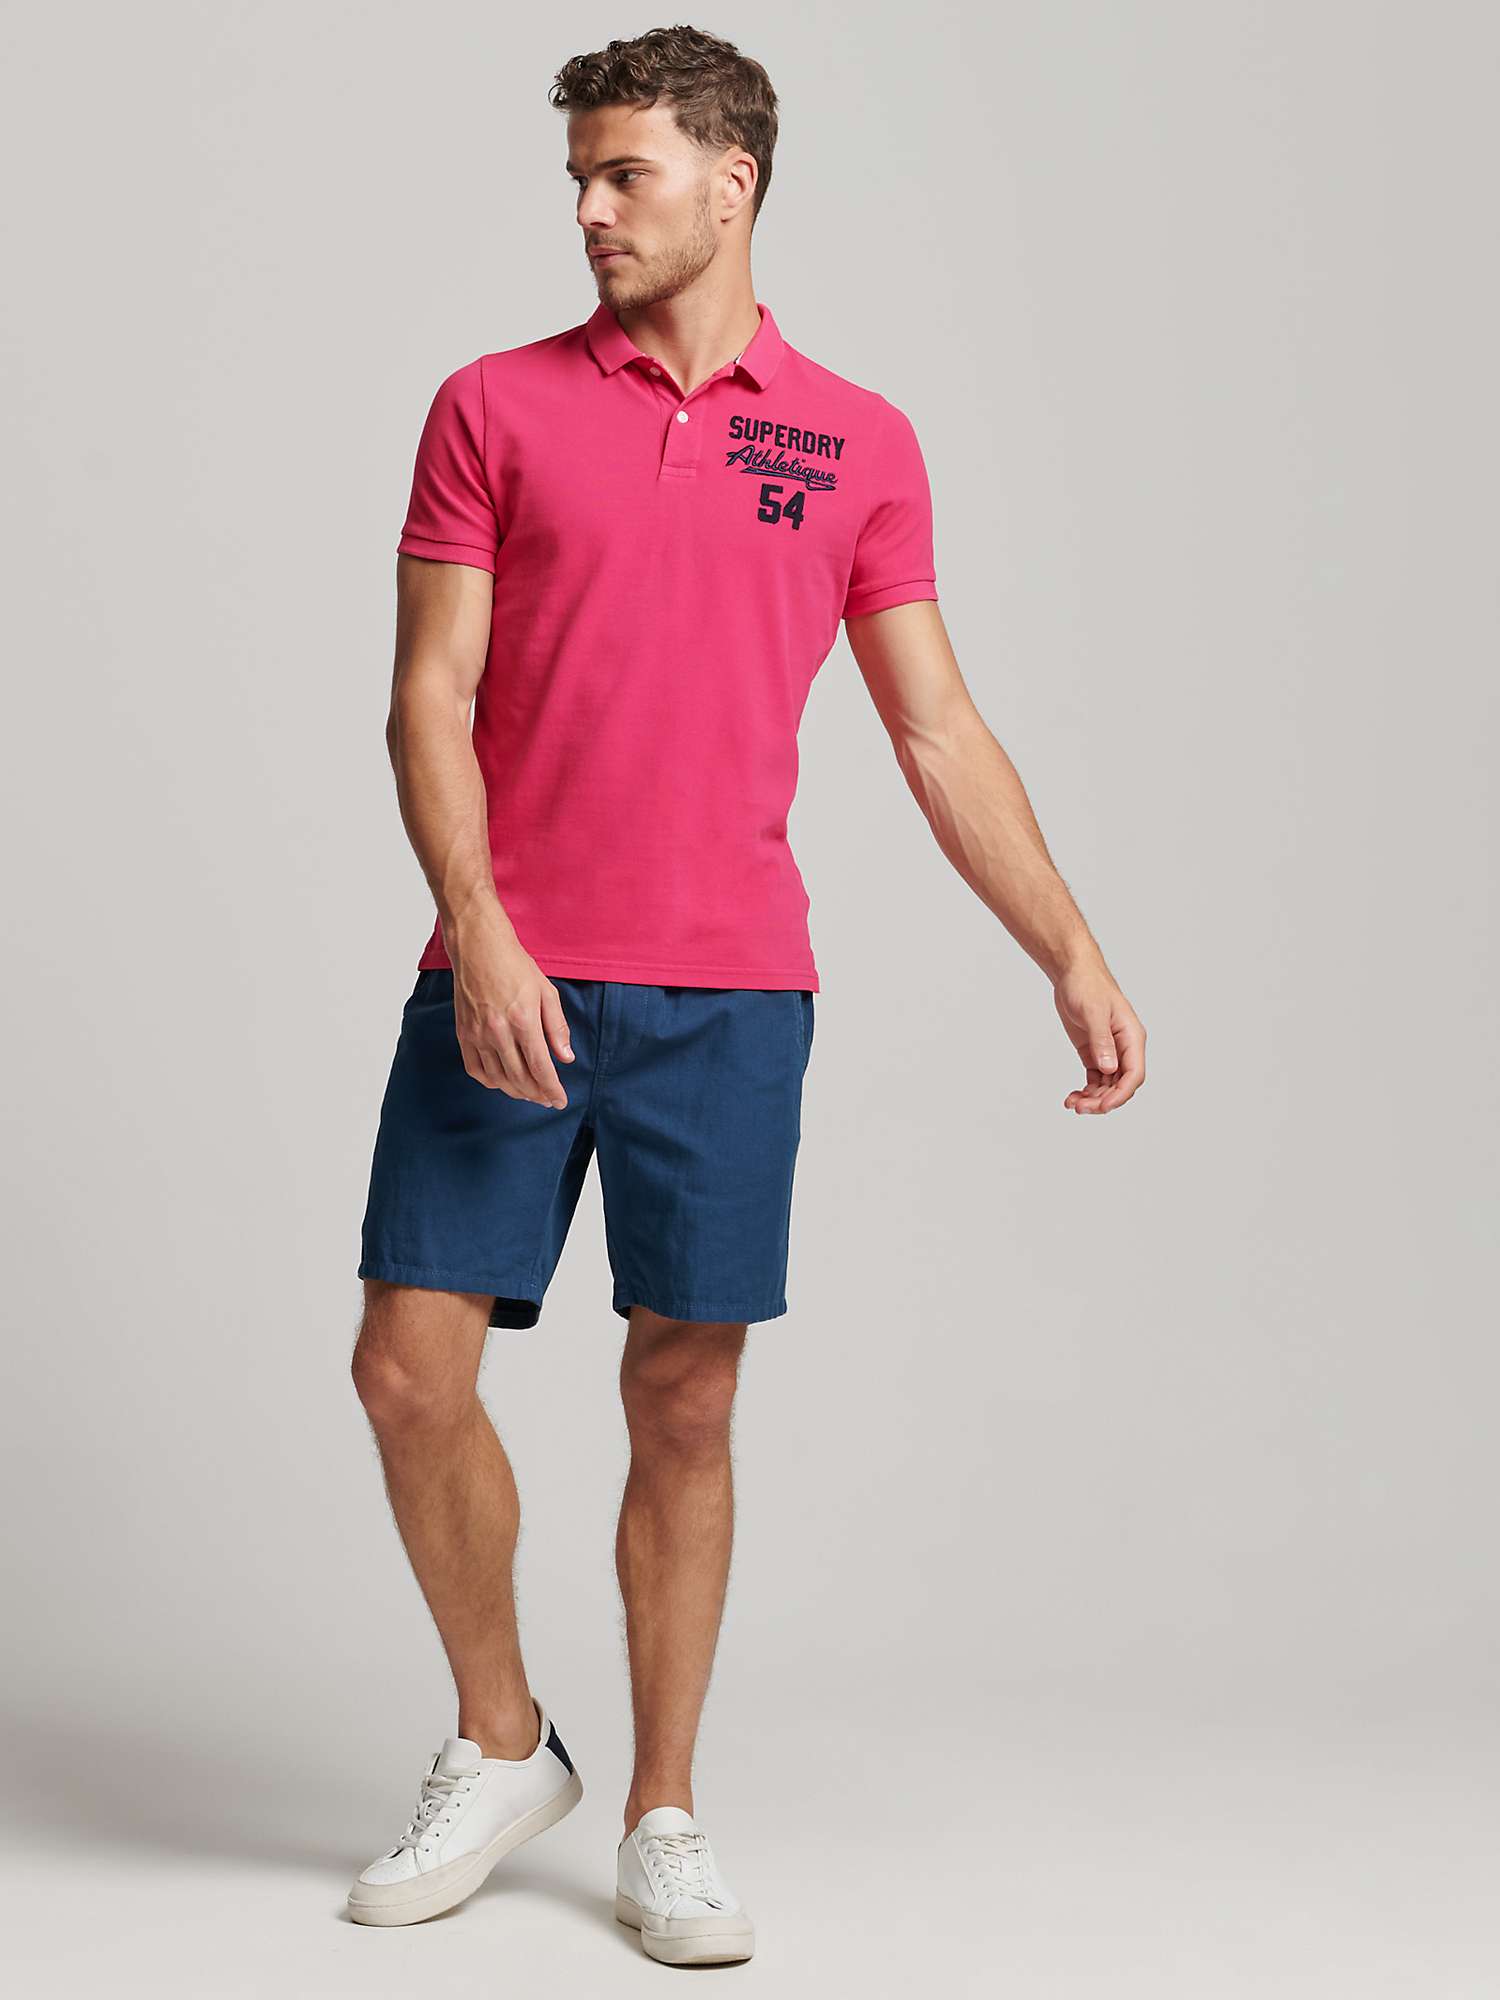 Superdry Superstate Polo Shirt, Raspberry Pink at John Lewis & Partners